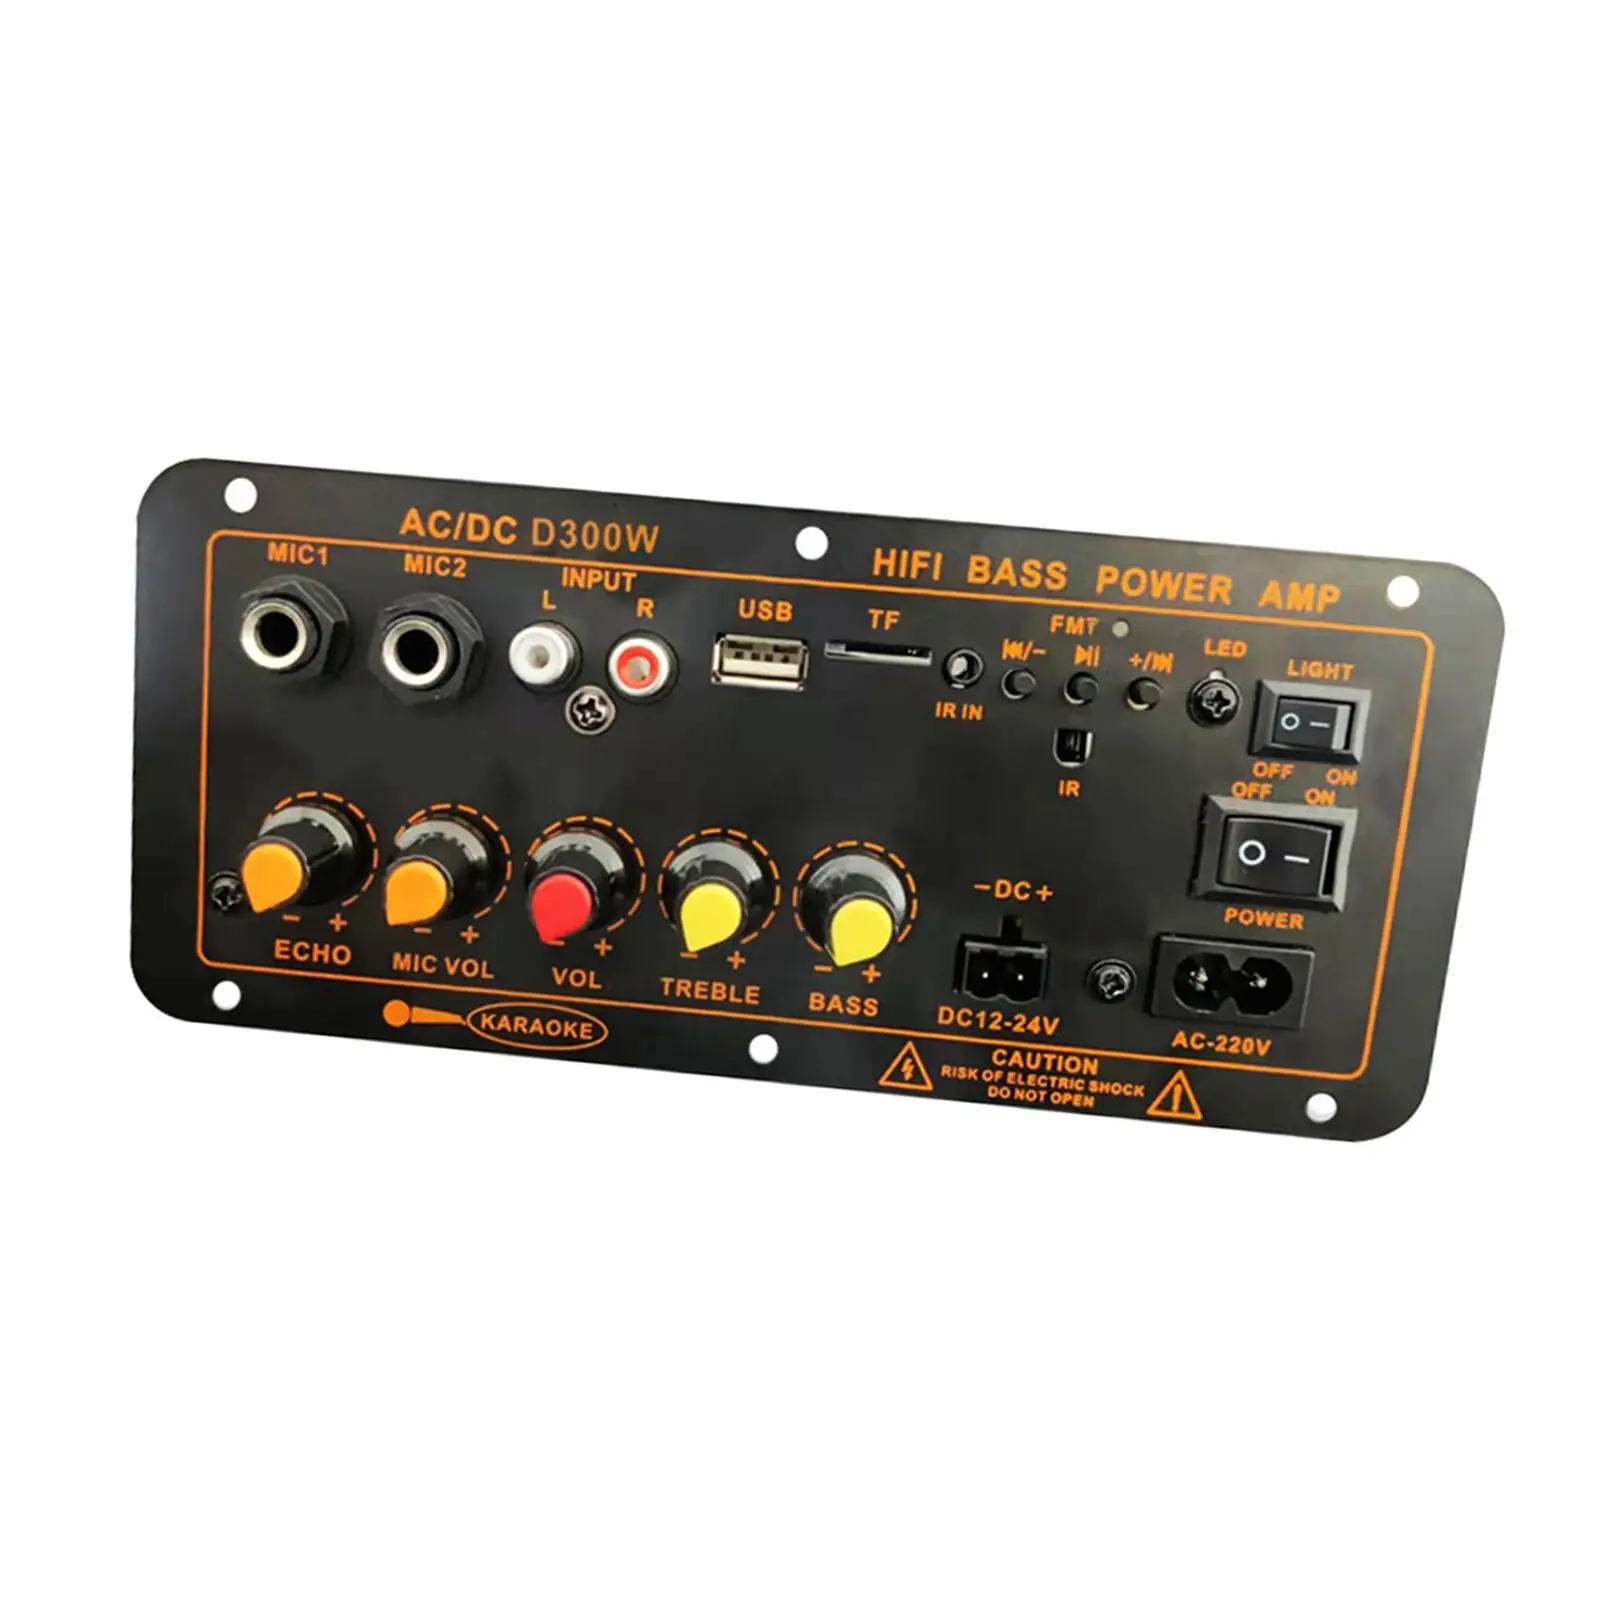 300W Bluetooth High Power Stereo Amplifier Board EU 220V Sturdy Powerful Function Easily Install with Knobs Subwoofer Amplifier